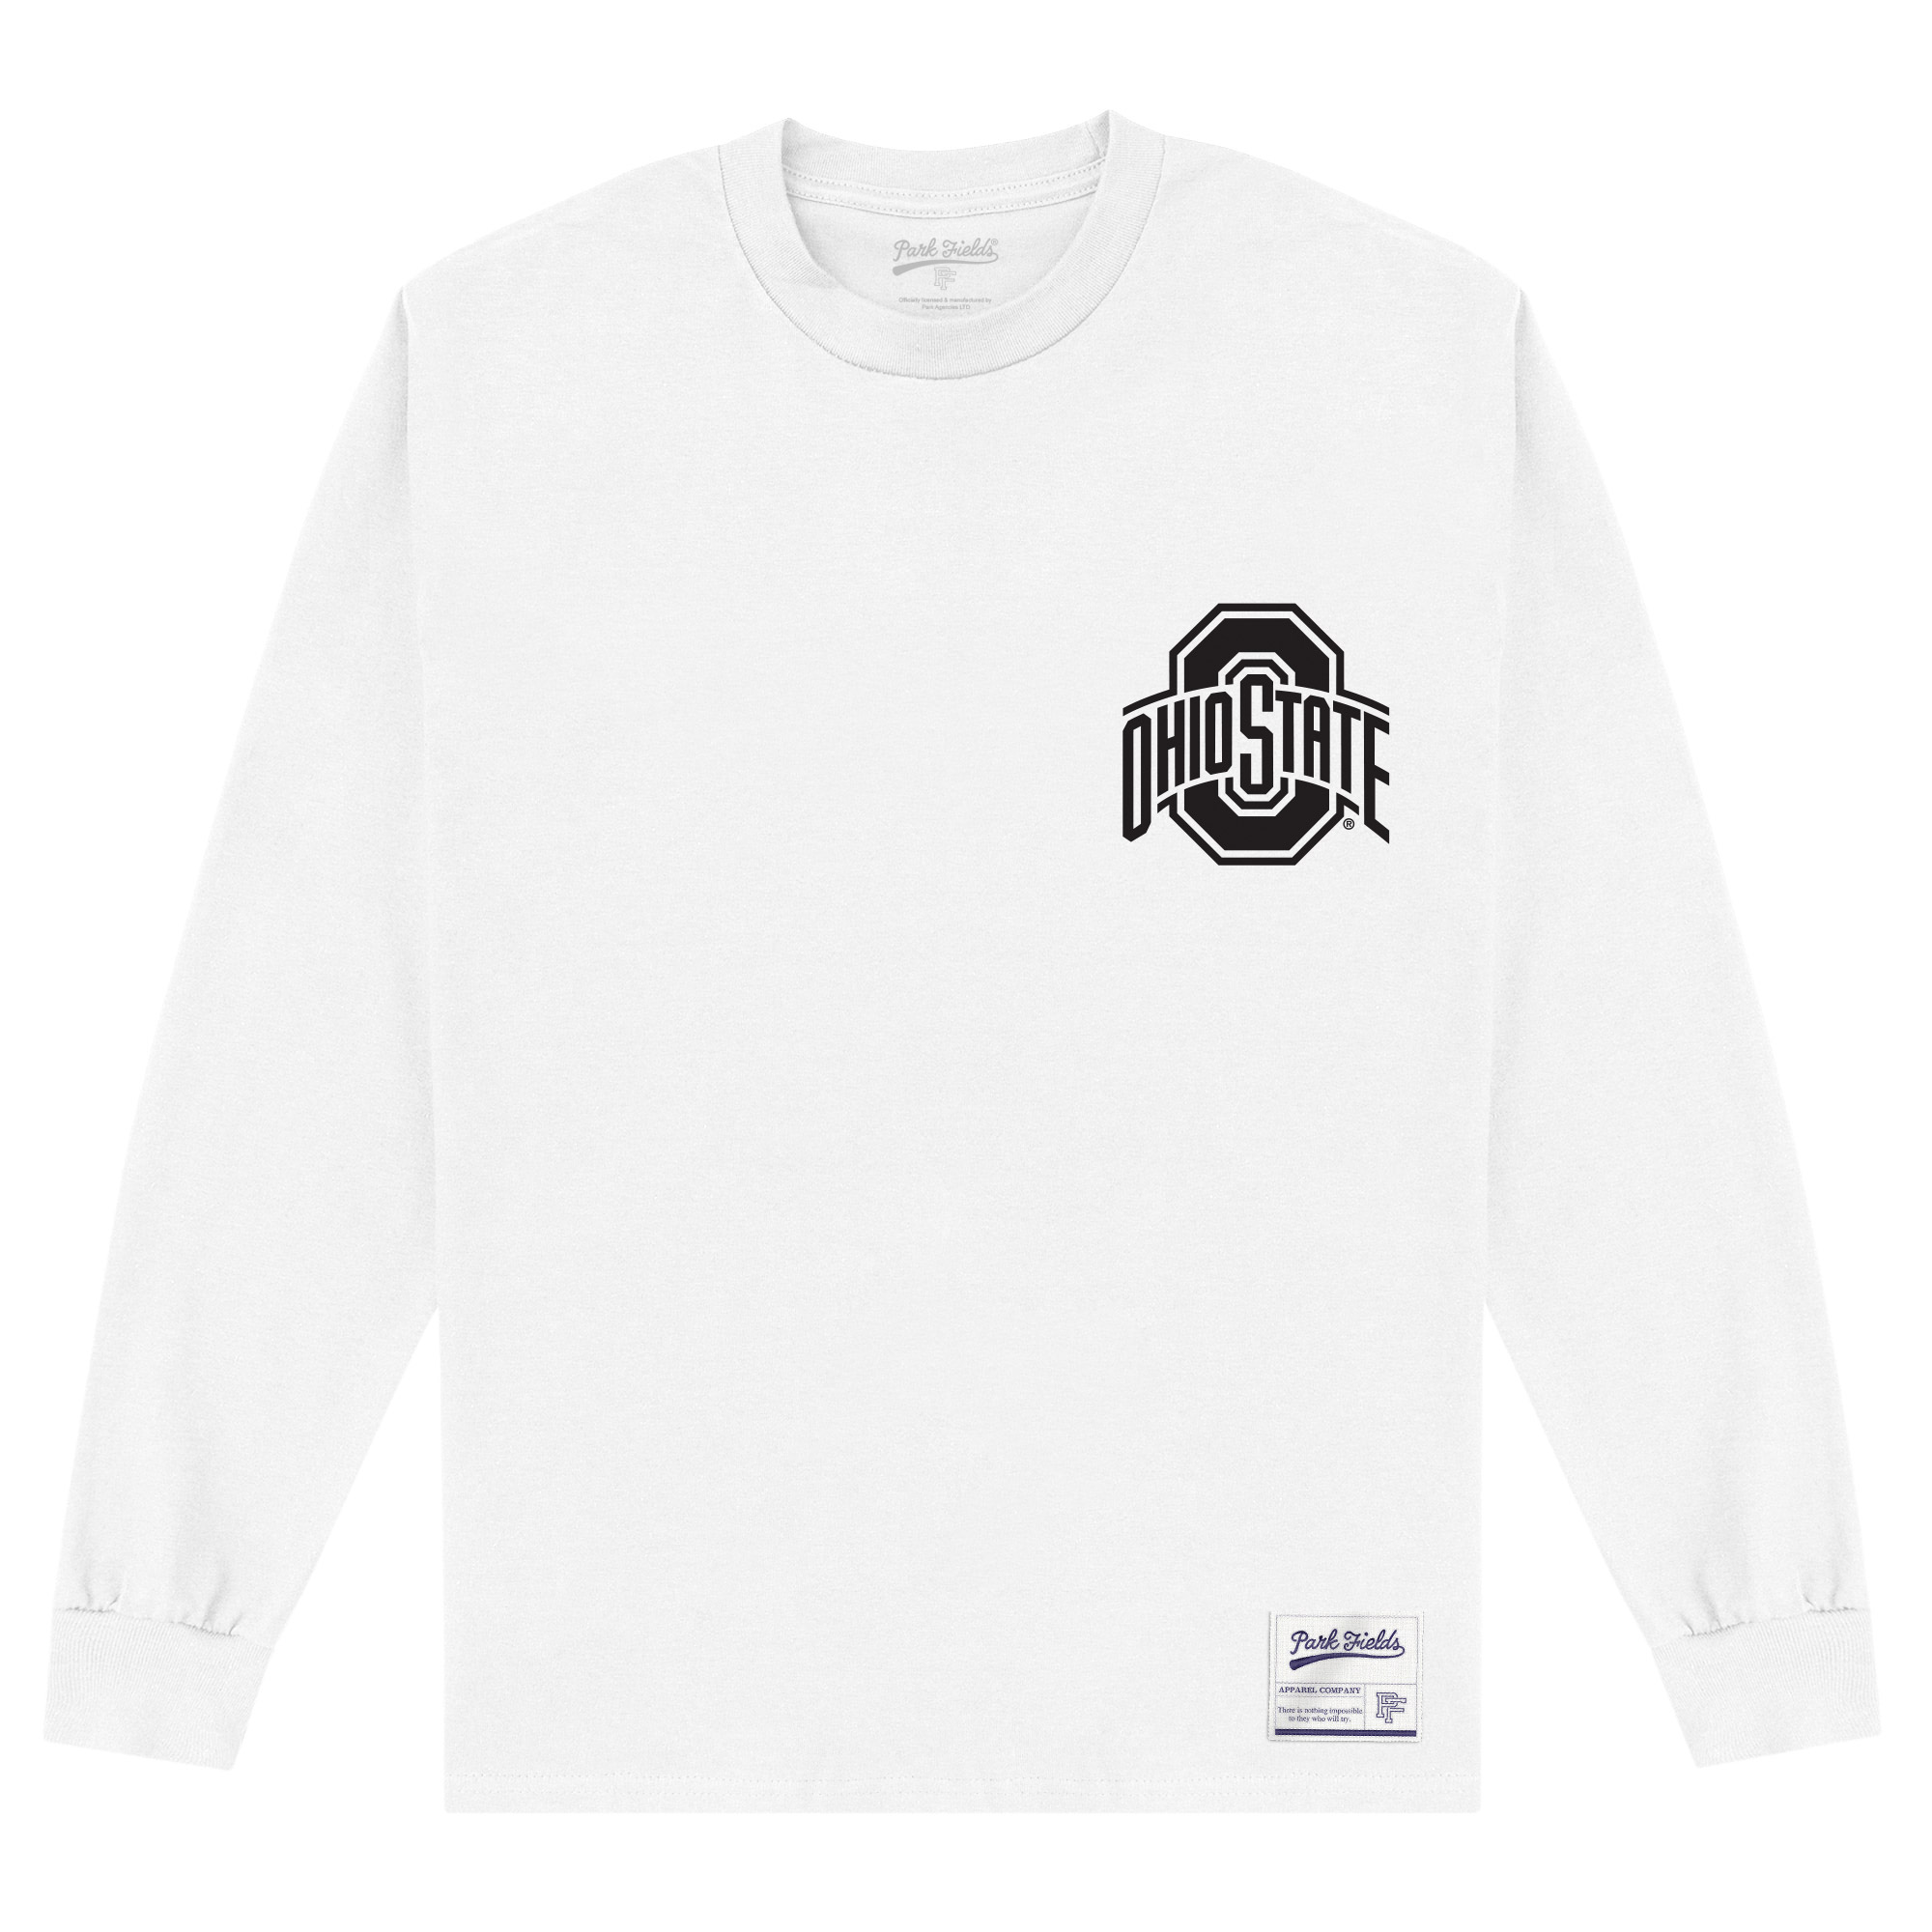 Official Ohio State University T-Shirt Long Sleeve Print Crew Neck T Shirt Tee